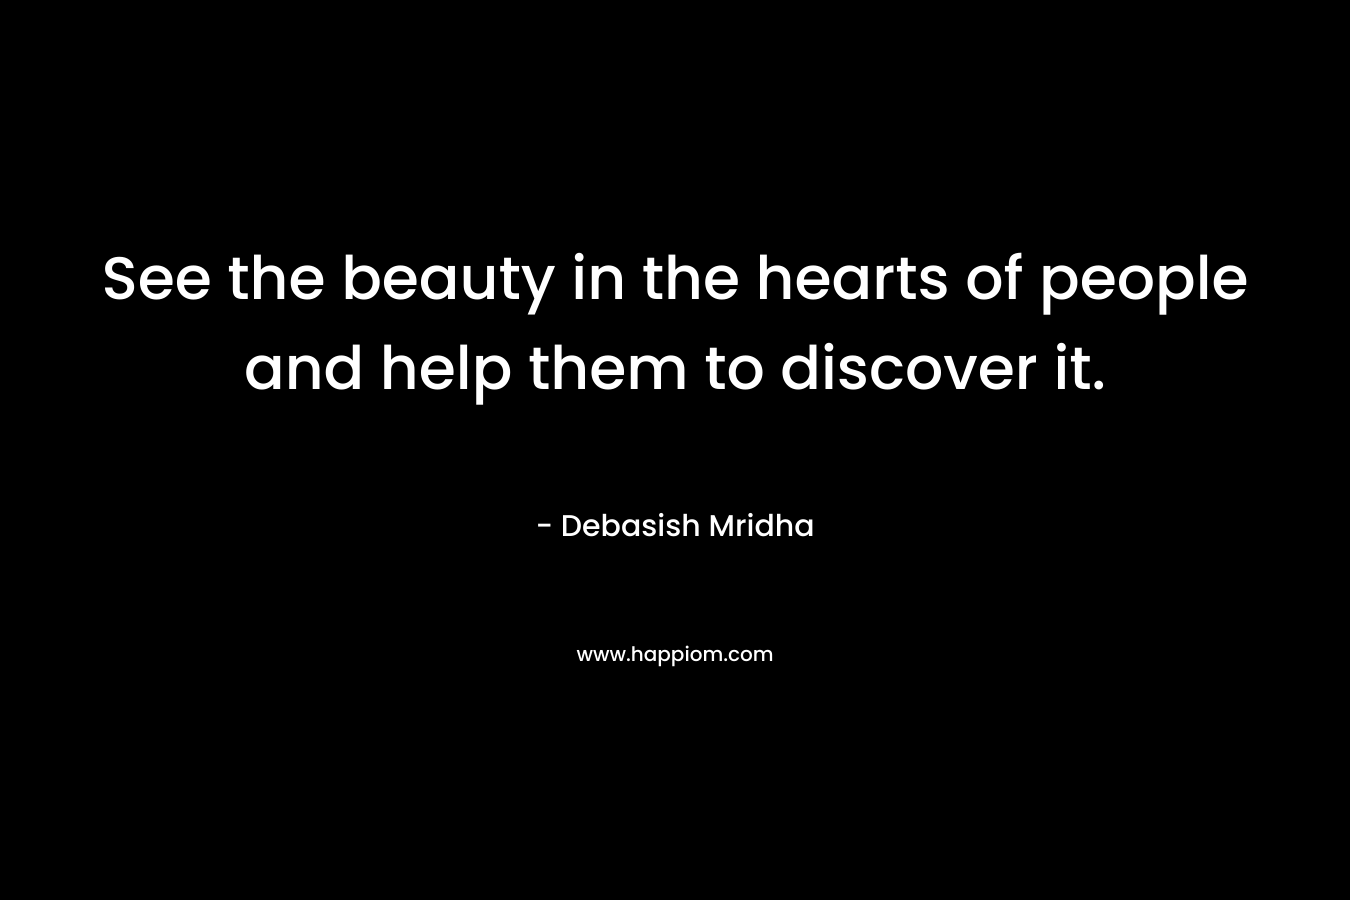 See the beauty in the hearts of people and help them to discover it.